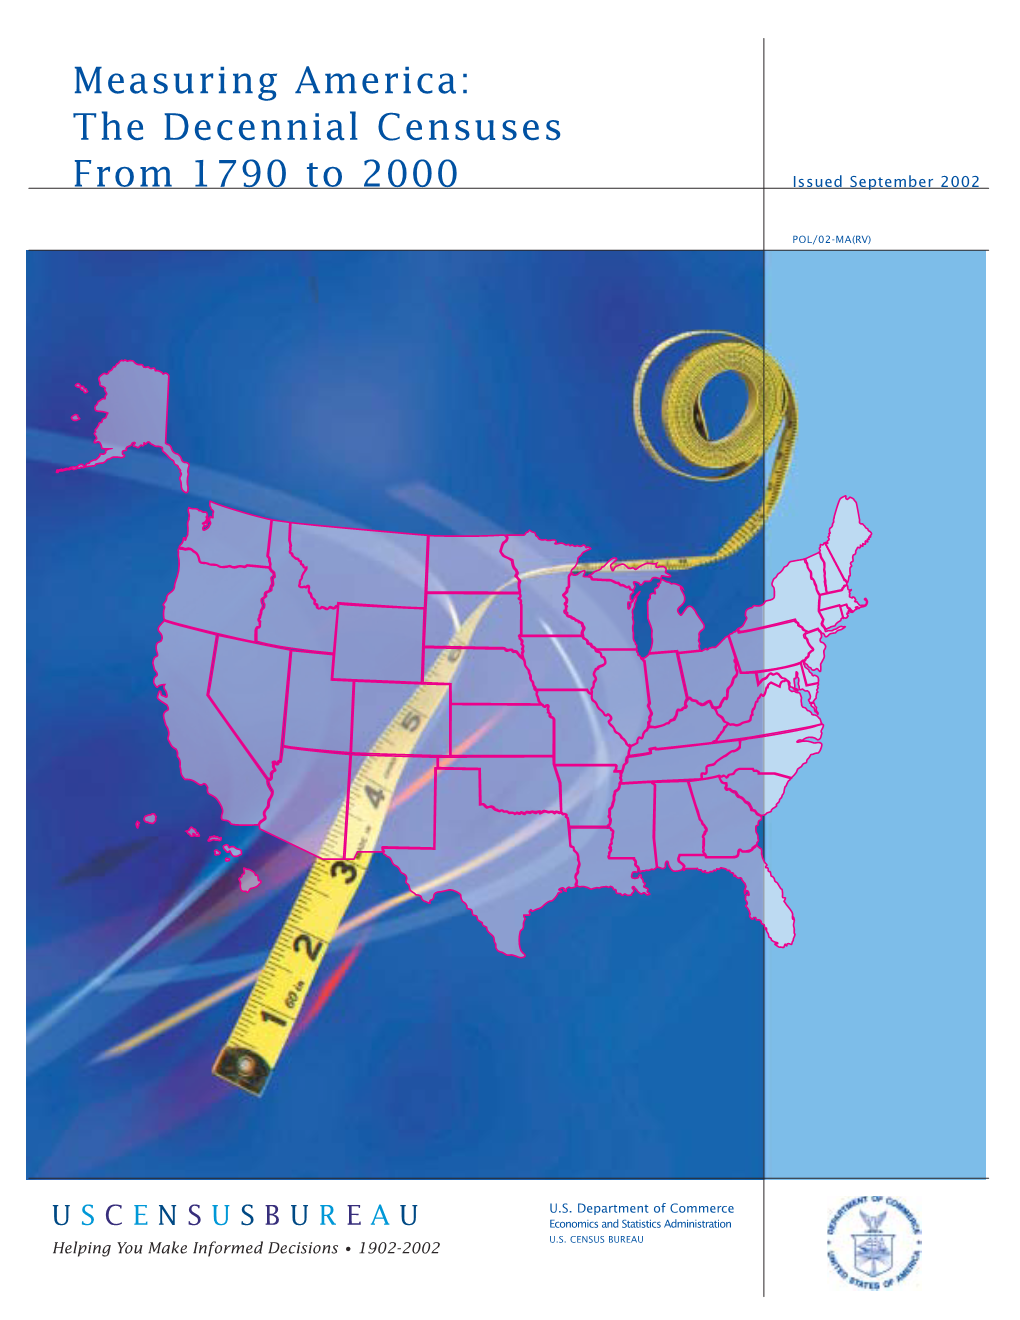 Measuring America: the Decennial Censuses from 1790 to 2000